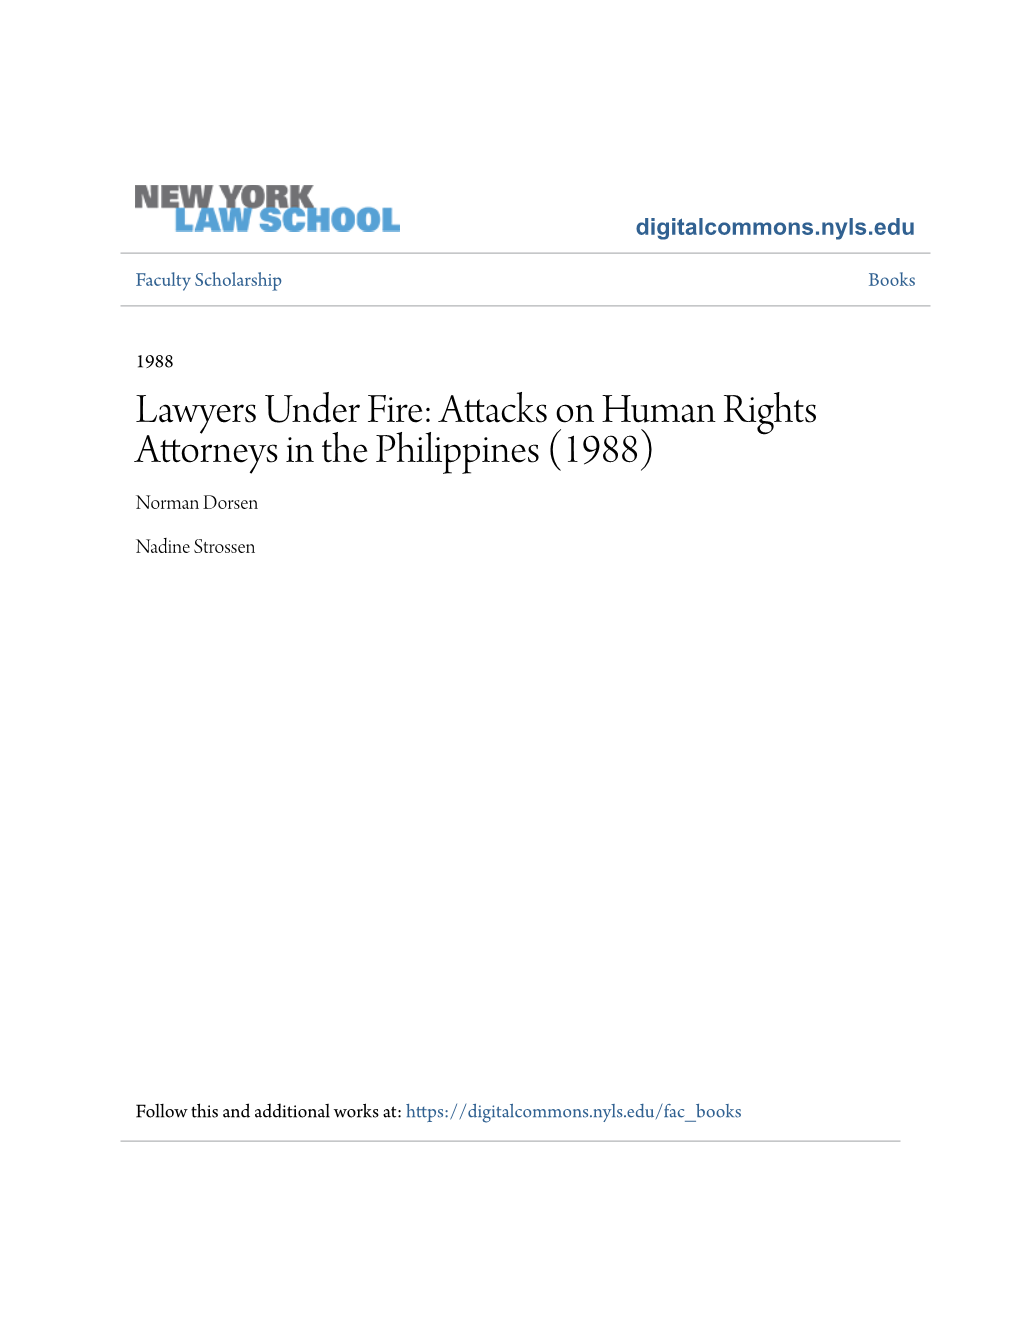 Attacks on Human Rights Attorneys in the Philippines (1988) Norman Dorsen